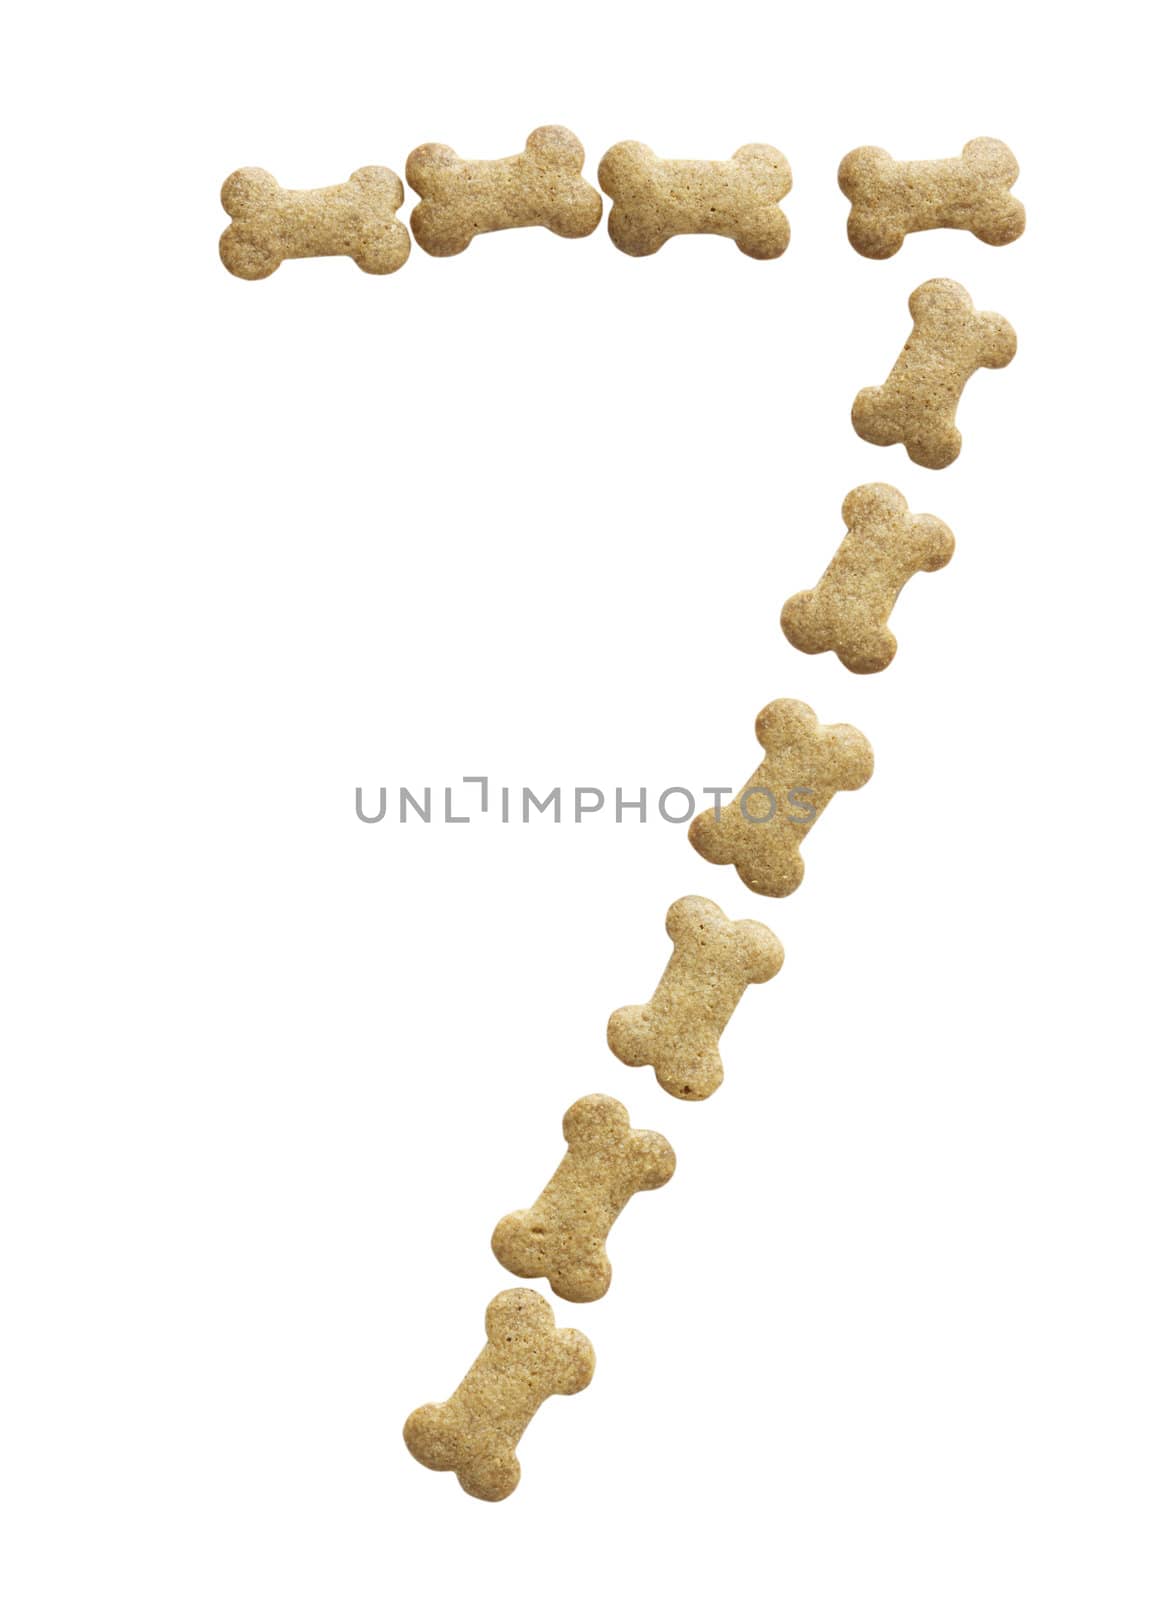 Number 7 made of bone shape dog food on white background, shot directly from above